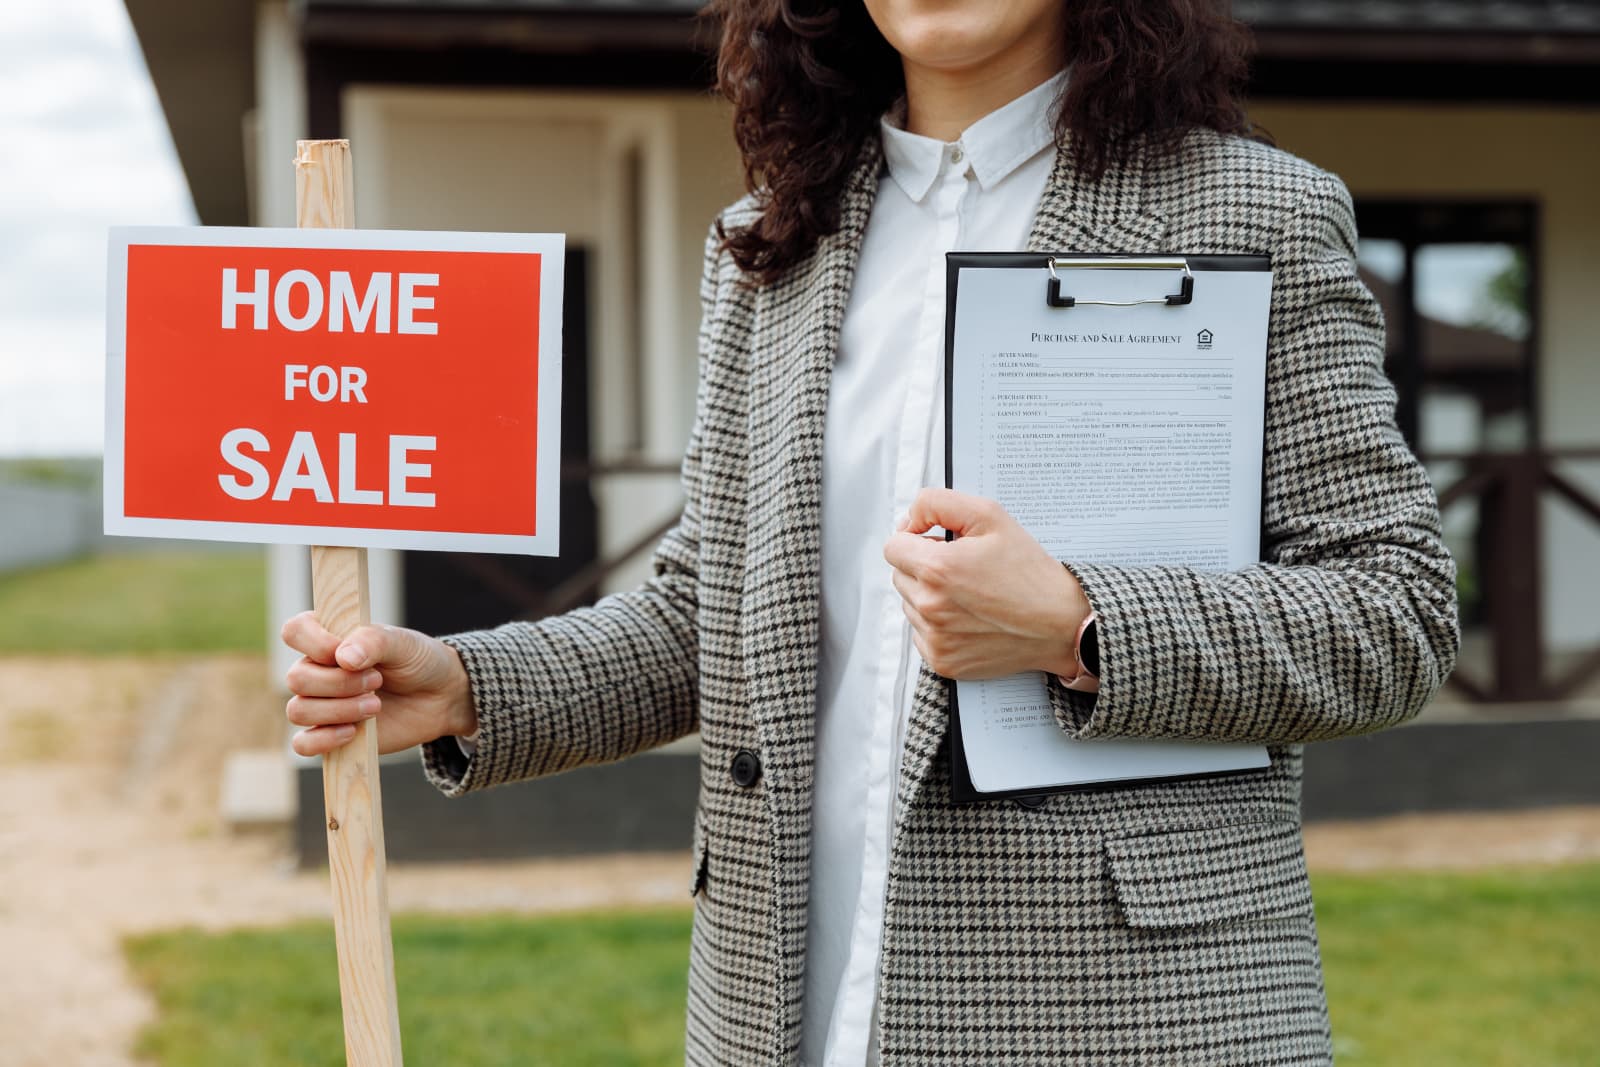 A stock photo of a home for sale with a woman in front of it holding a clip board